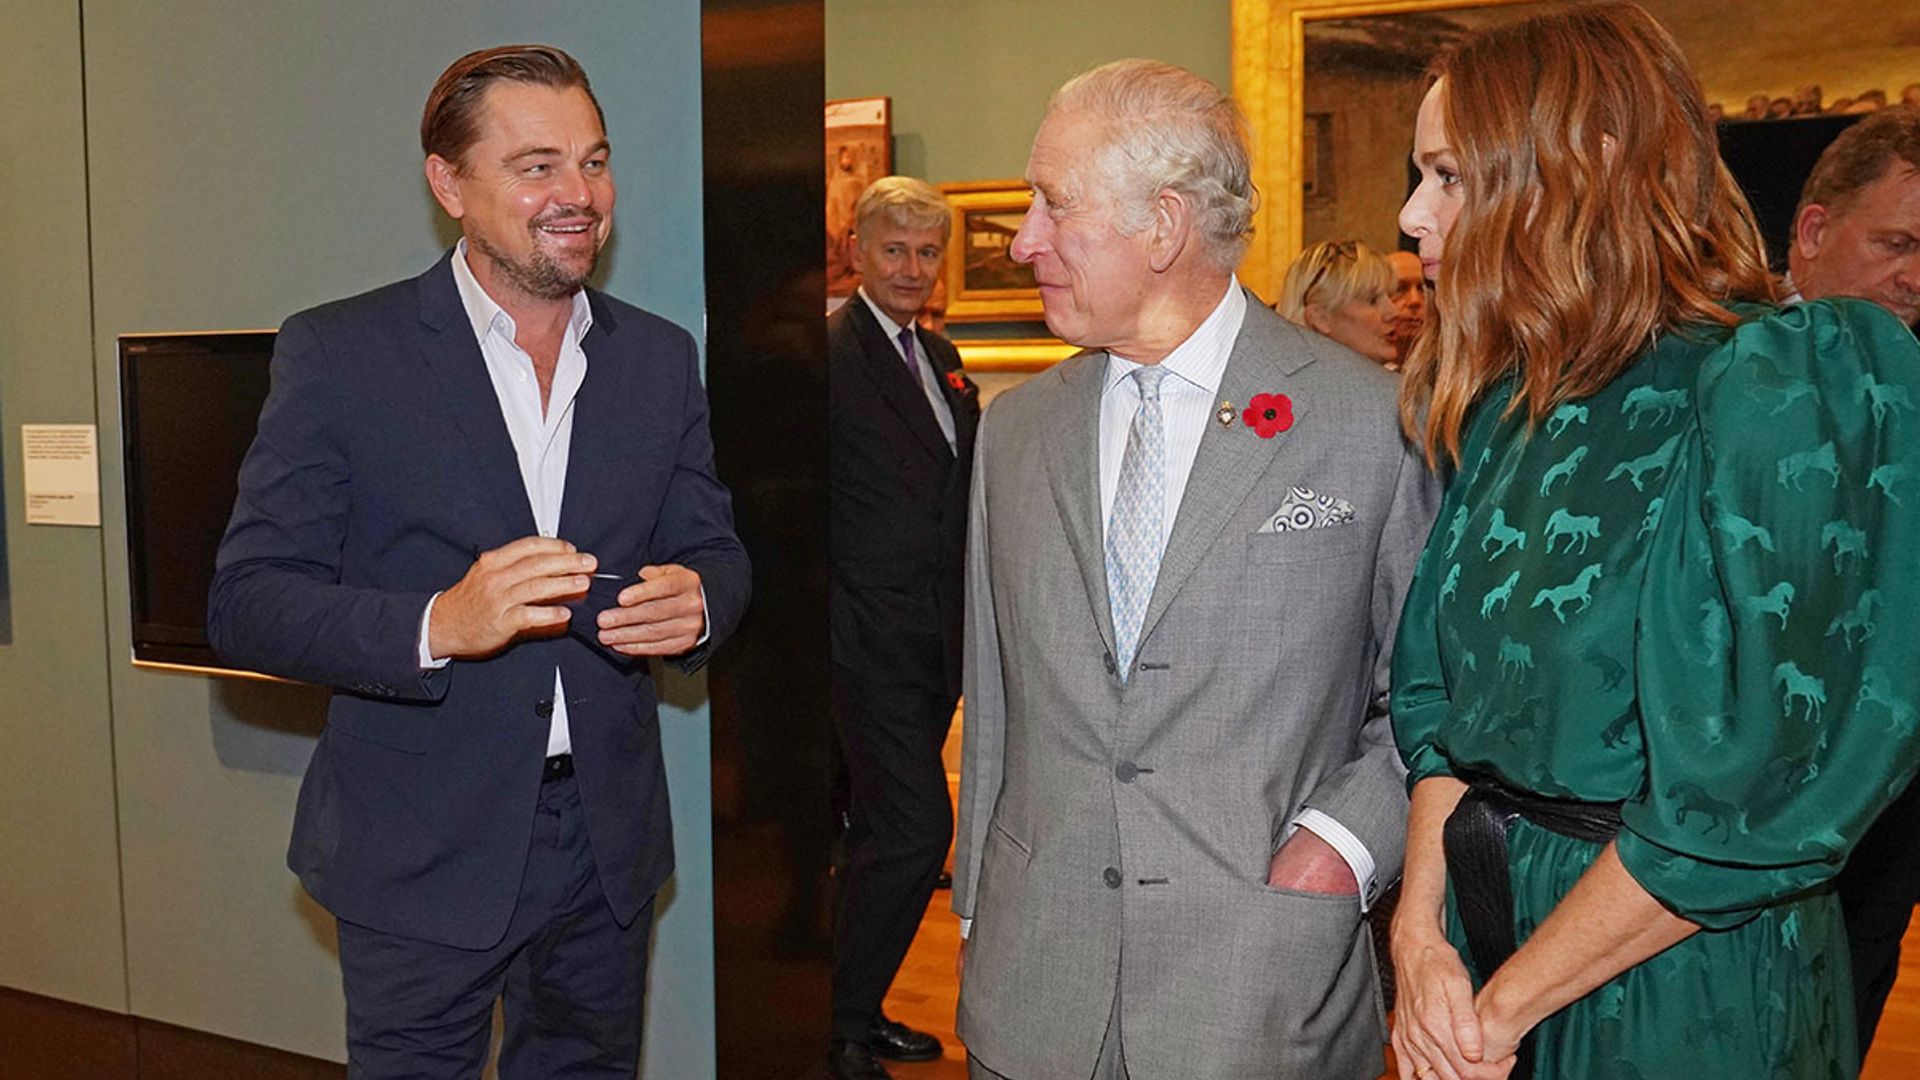 Prince Charles meets Leonardo DiCaprio at Stella McCartney's exhibition for COP26